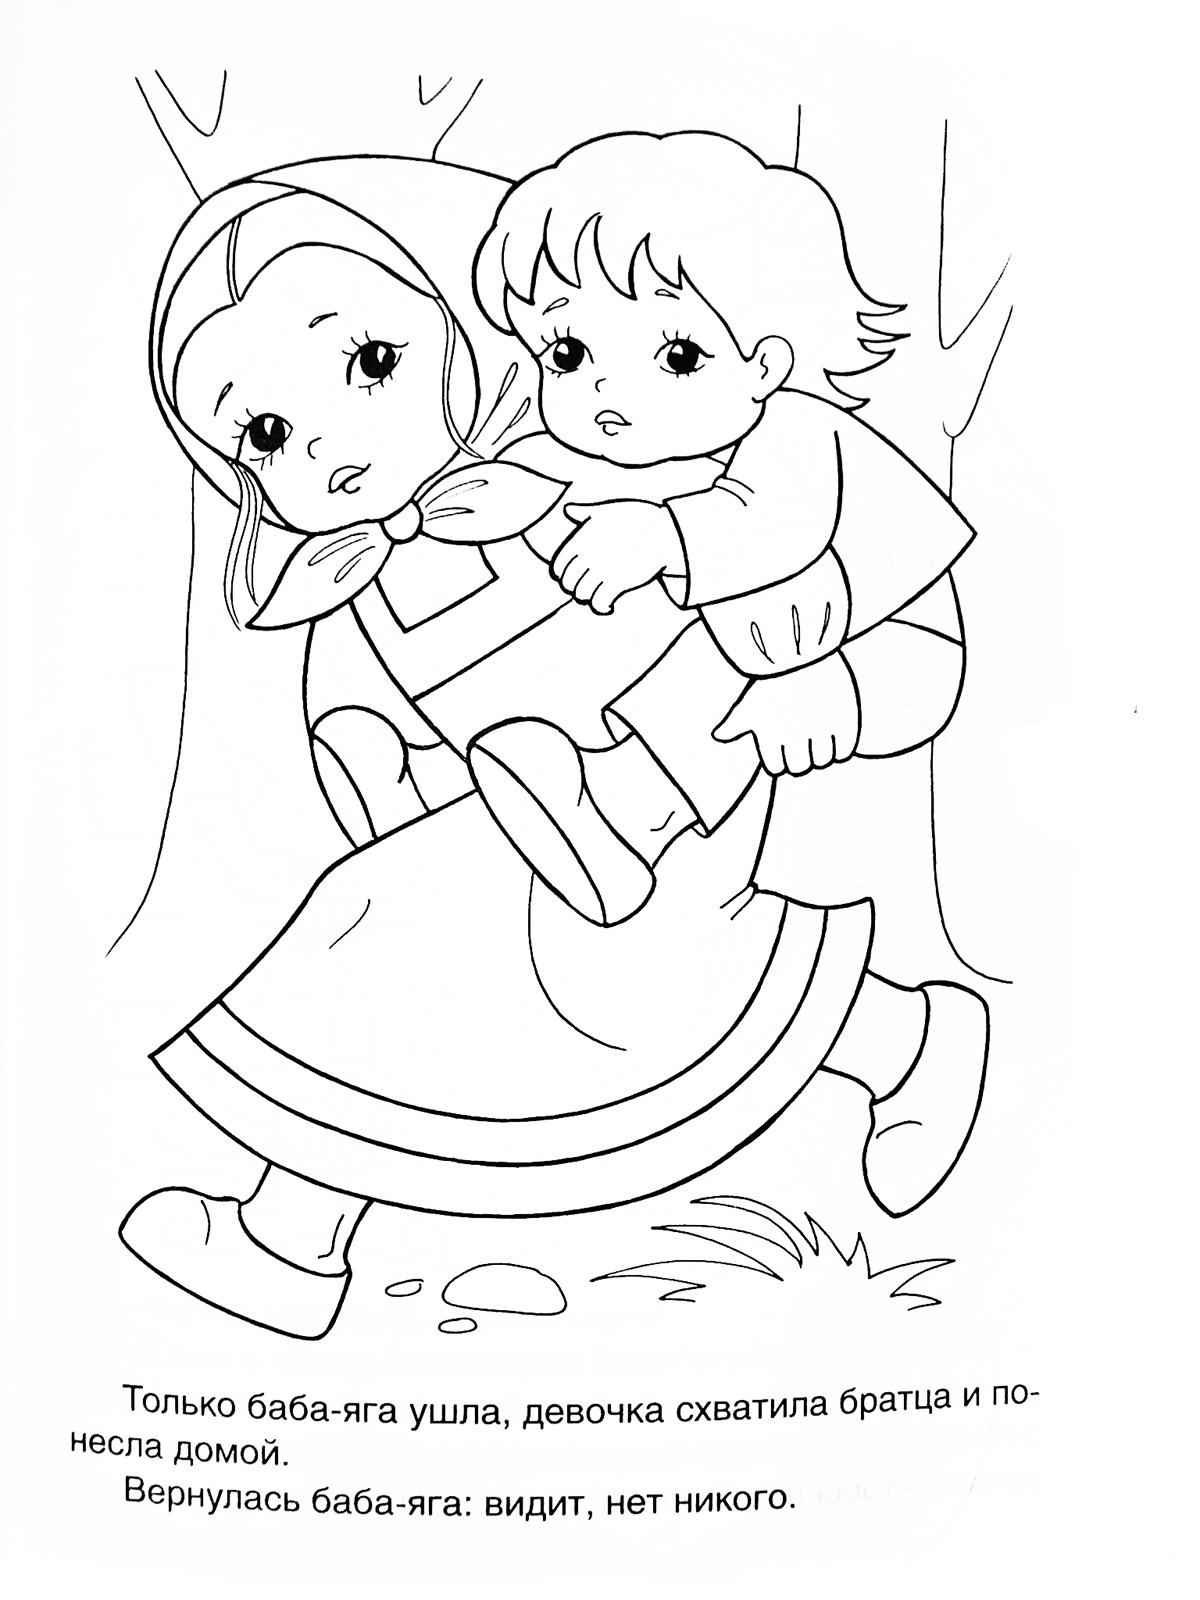 Coloring baba The girl runs with the boy on his back in the woods on the Baba Yaga